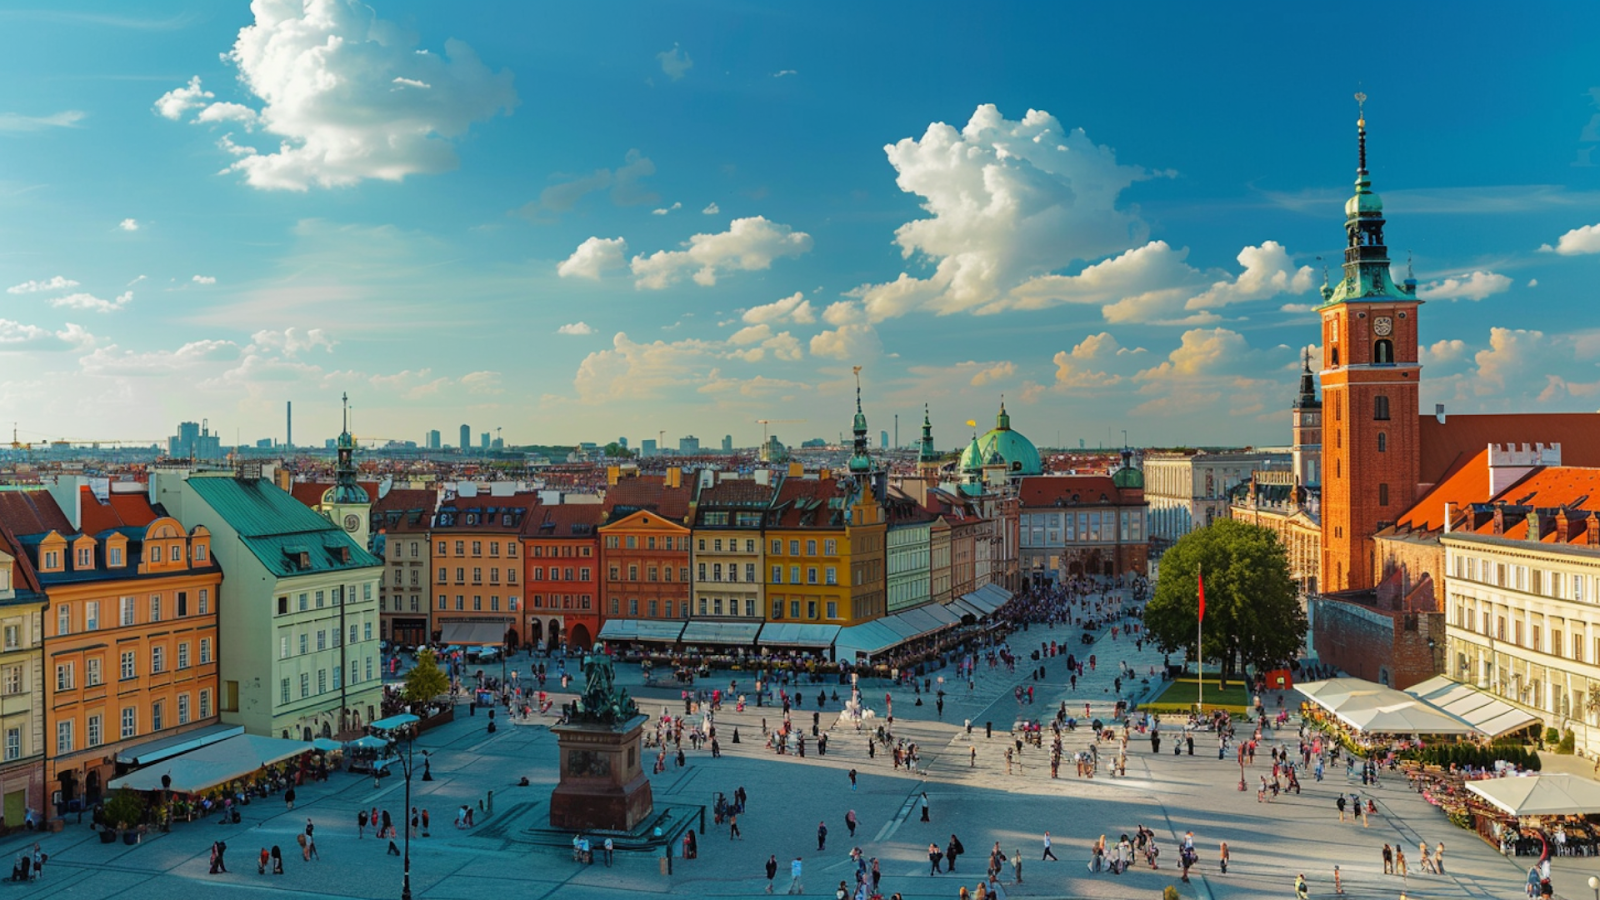 A panoramic view of Warsaw, Poland under blue, cloudy skies